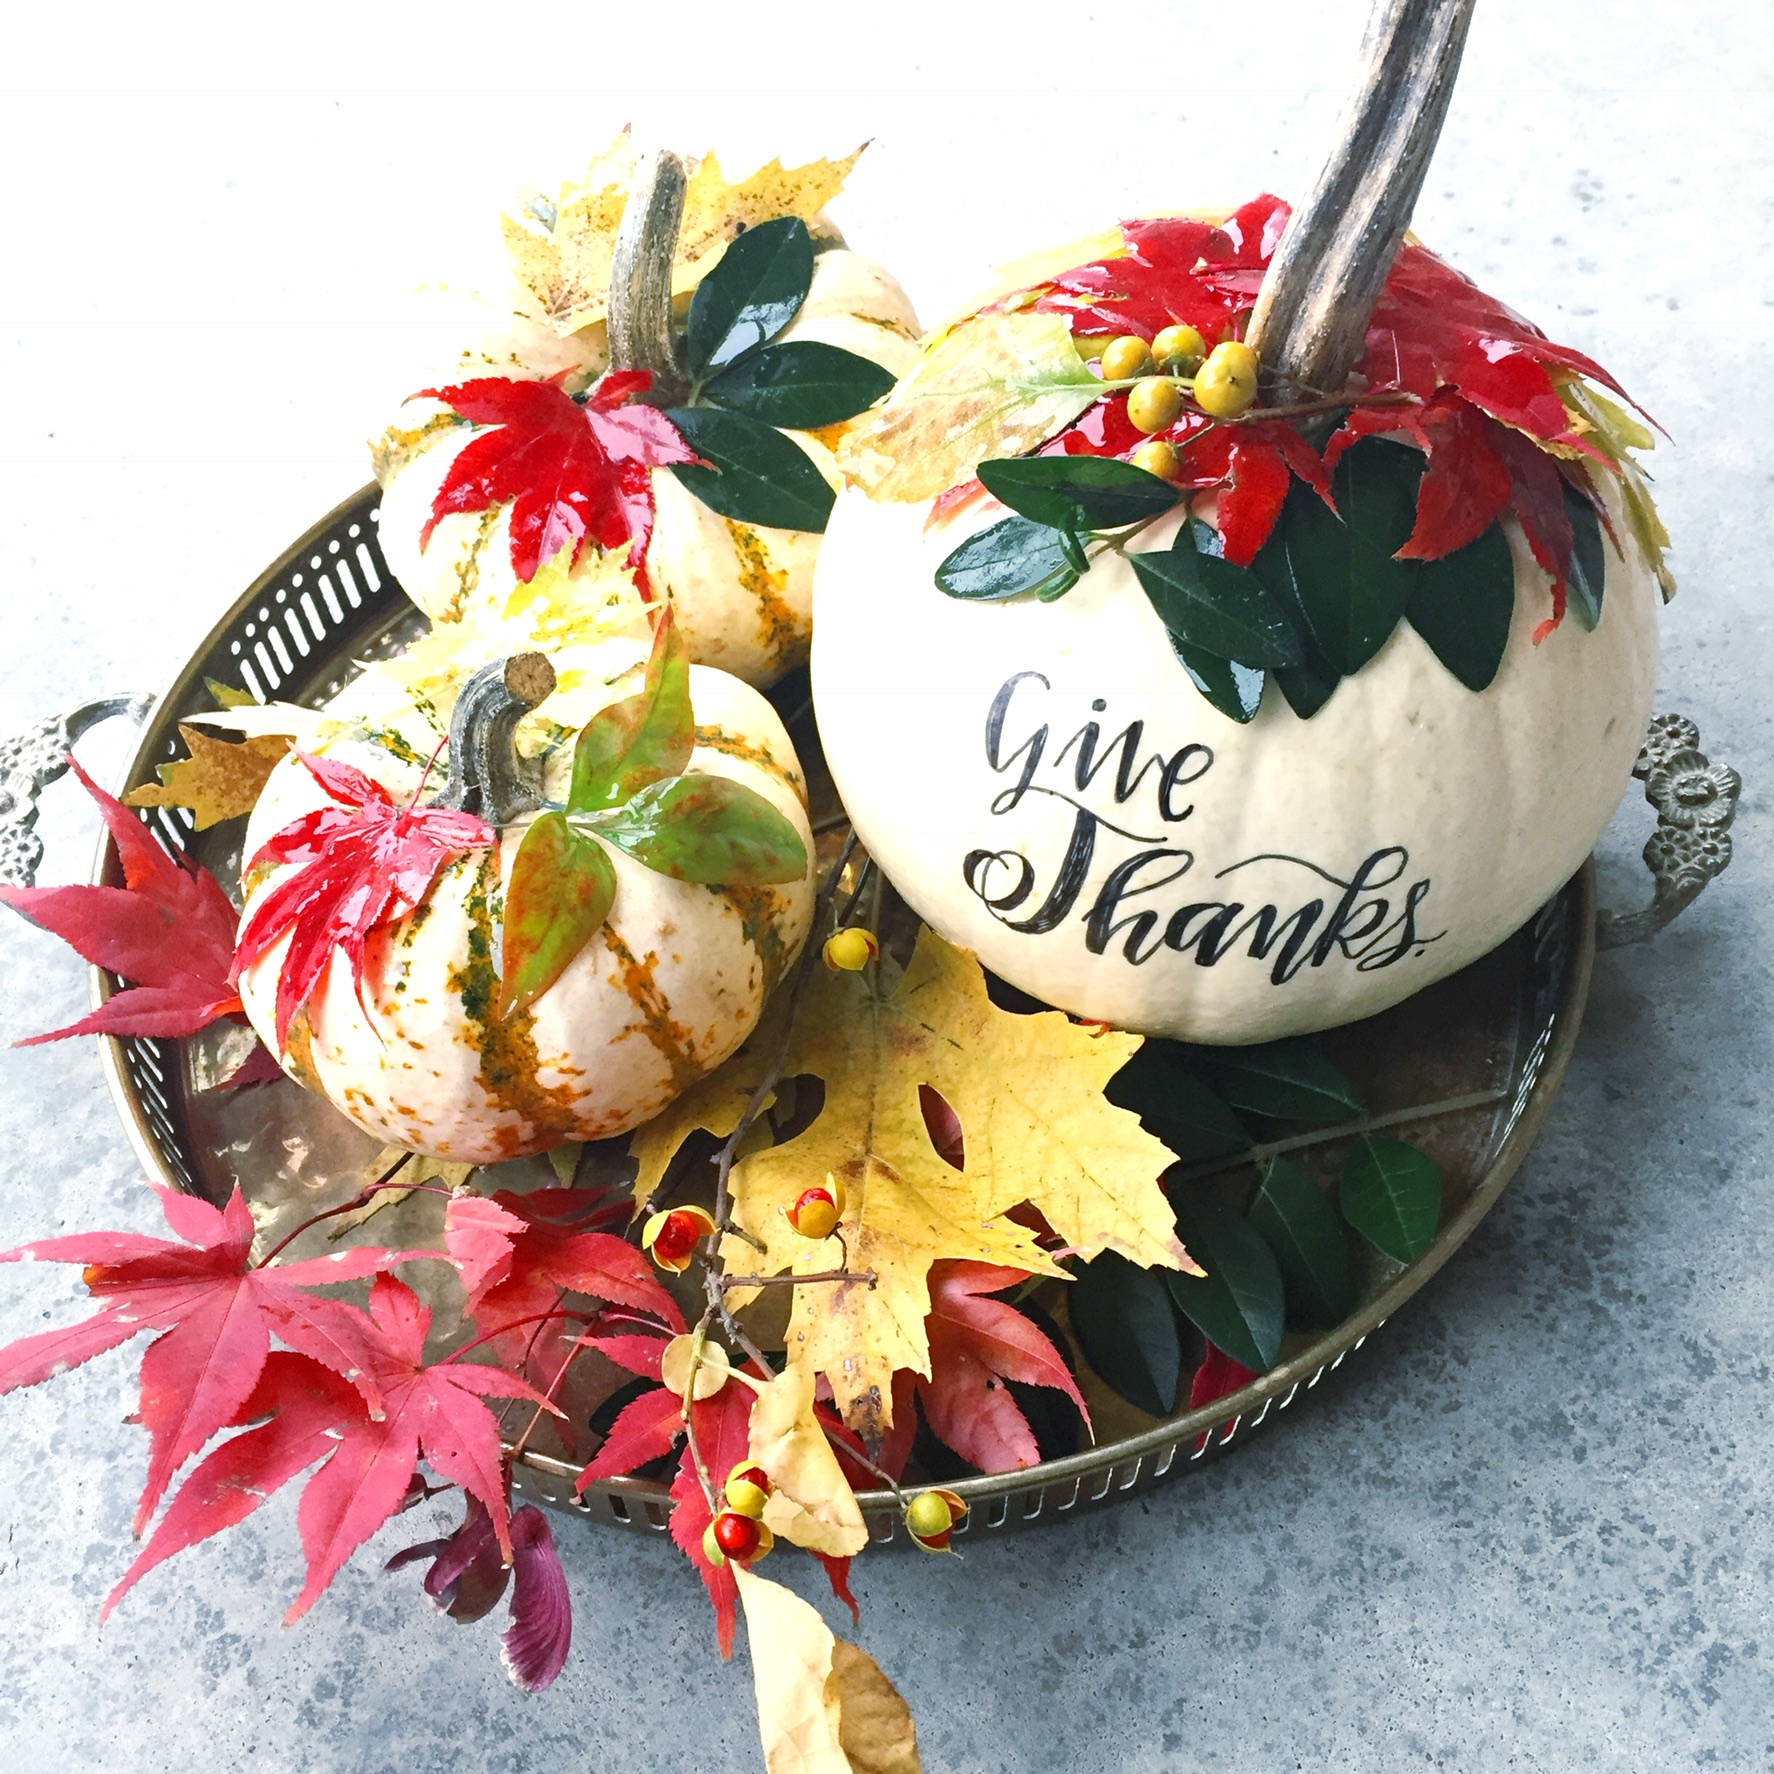 Lauren Fitzmaurice of Renmade Calligraphy takes you step by step through a tutorial of how to create a botanical pumpkin centerpiece, perfect for decorating the table of a thanksgiving or fall themed get together. Lauren uses Tombow USA products to create this centerpiece with live pumpkins and gourds and fallen leaves and berries.